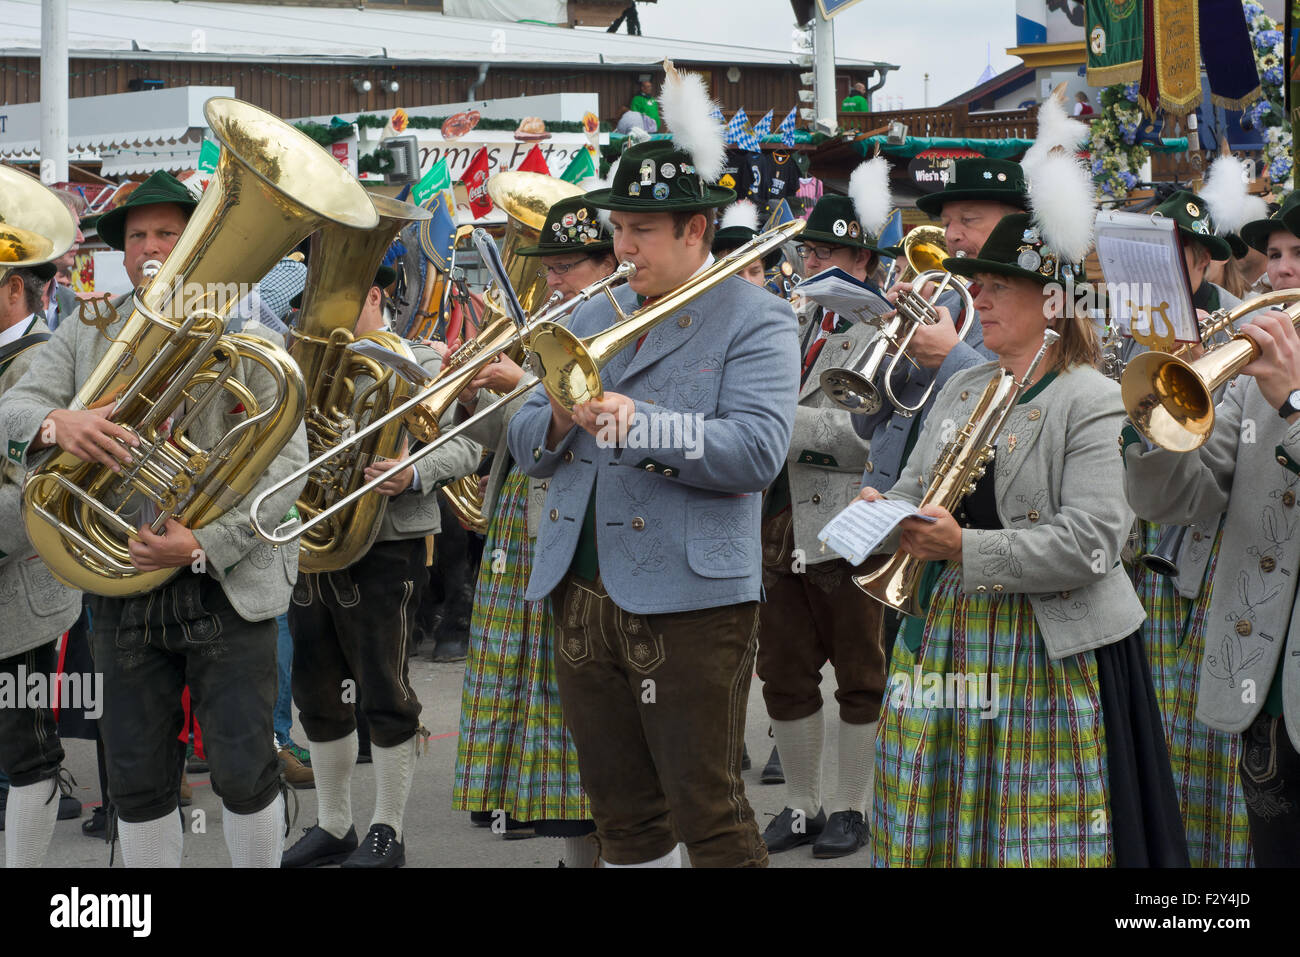 MUNICH, GERMANY – SEPT. 20, 2015: Traditional Marching Bands with Local Costumes entertain Crowds of visitors at the annual Oktoberfest. The Festival runs from September 19th until October 4th 2015 in Munich, Germany Stock Photo